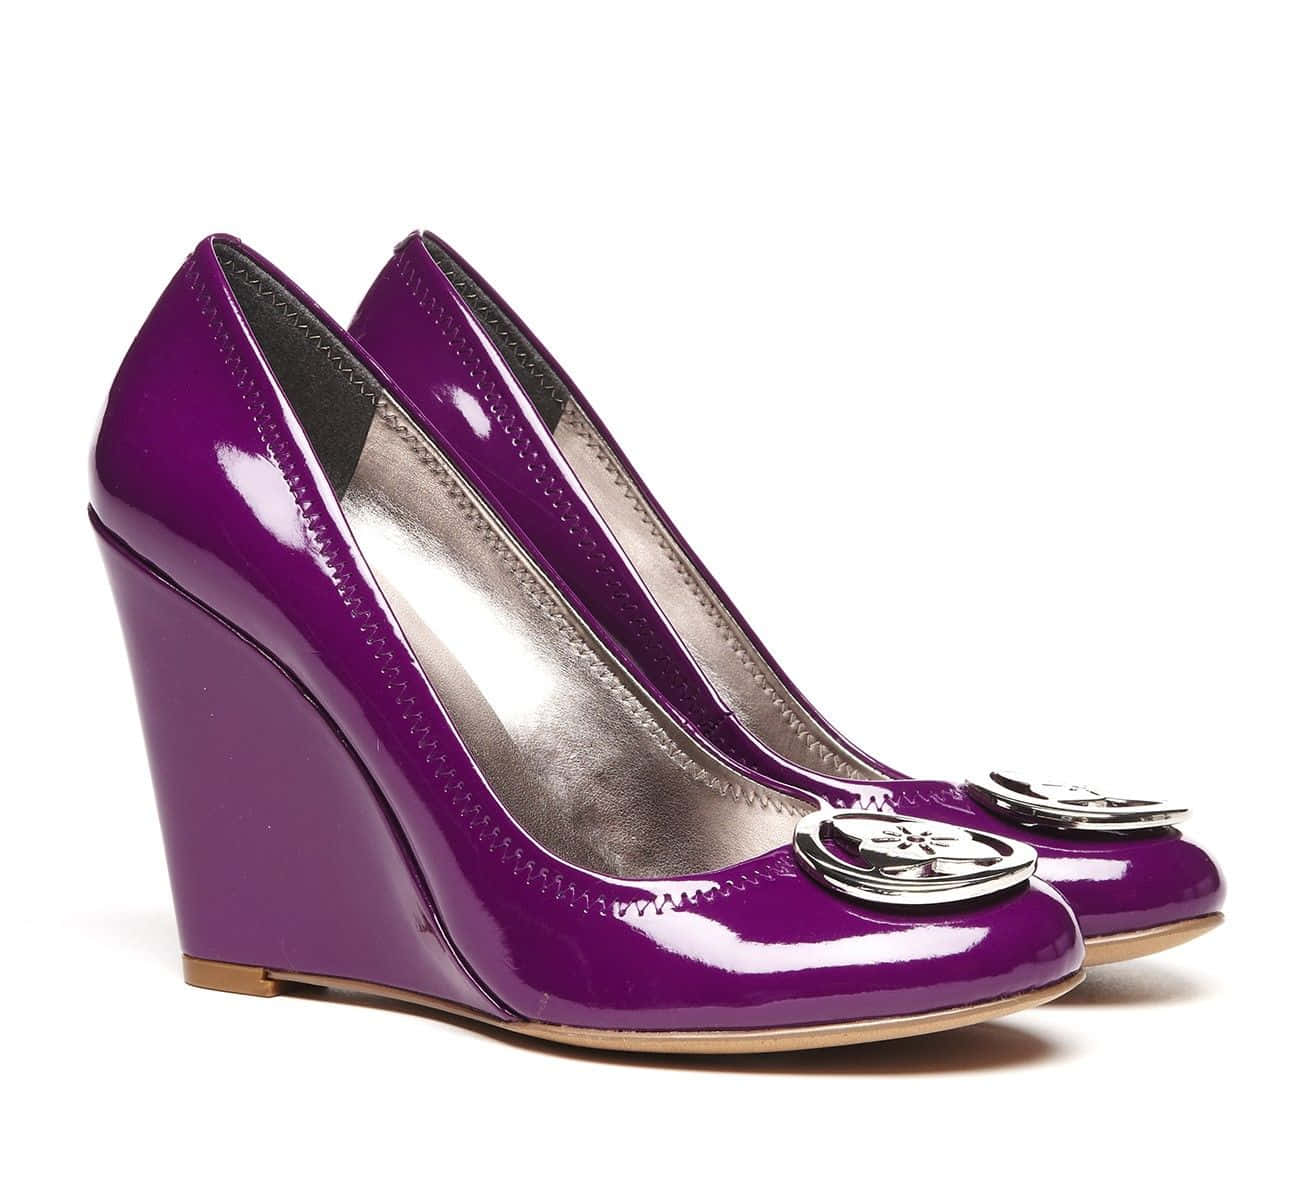 Step out in style with these stunning purple shoes! Wallpaper